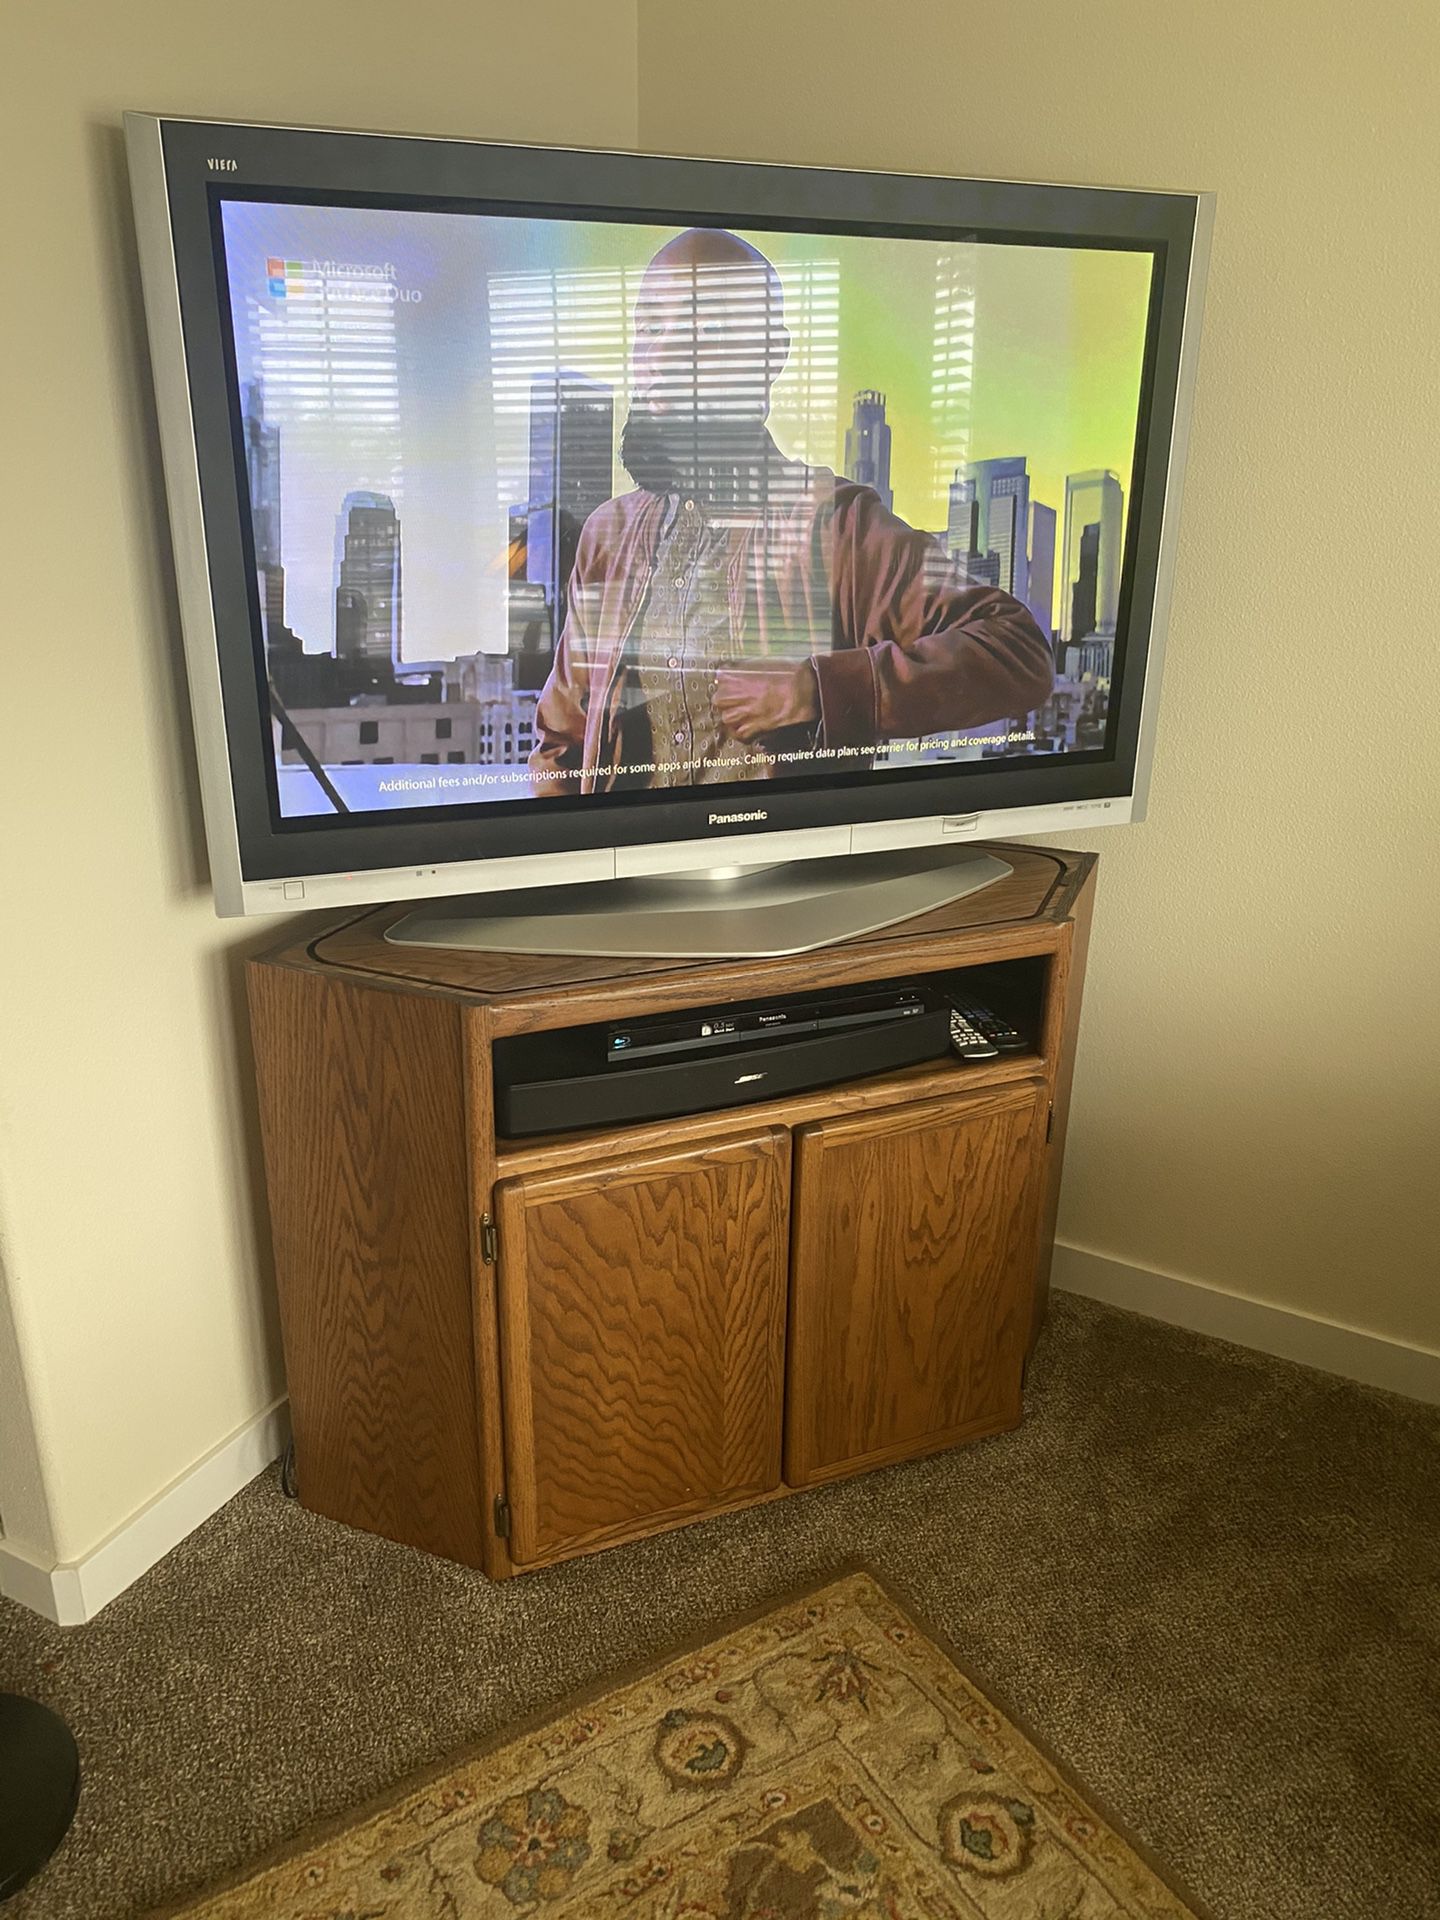 Panasonic 50 inch plasma tv, with or without corner cabinet